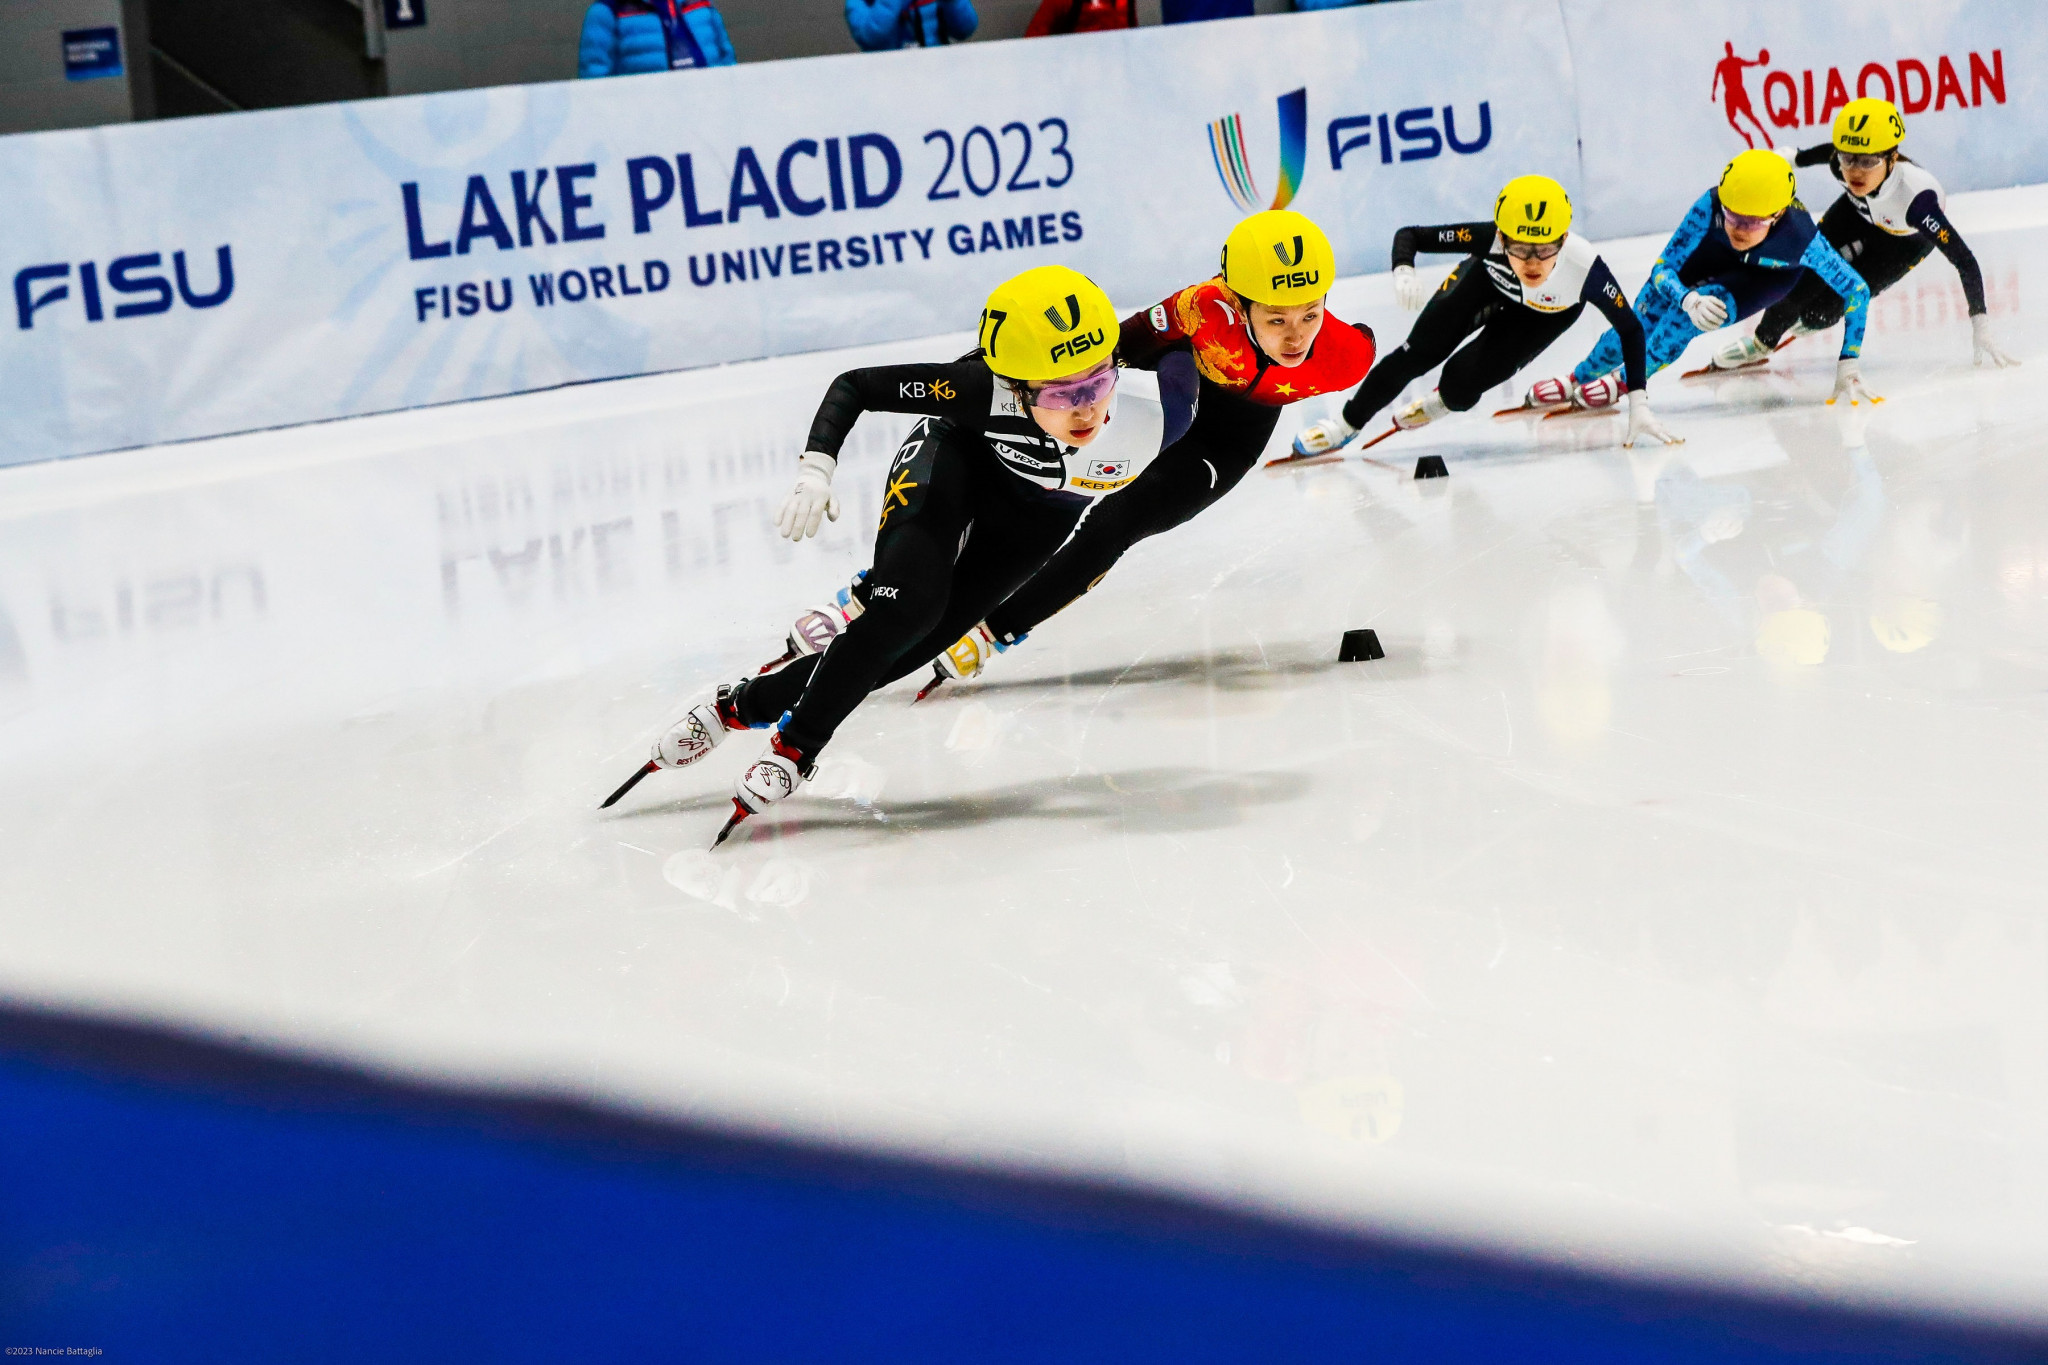 insidethegames is reporting LIVE from the Lake Placid 2023 FISU Winter World University Games